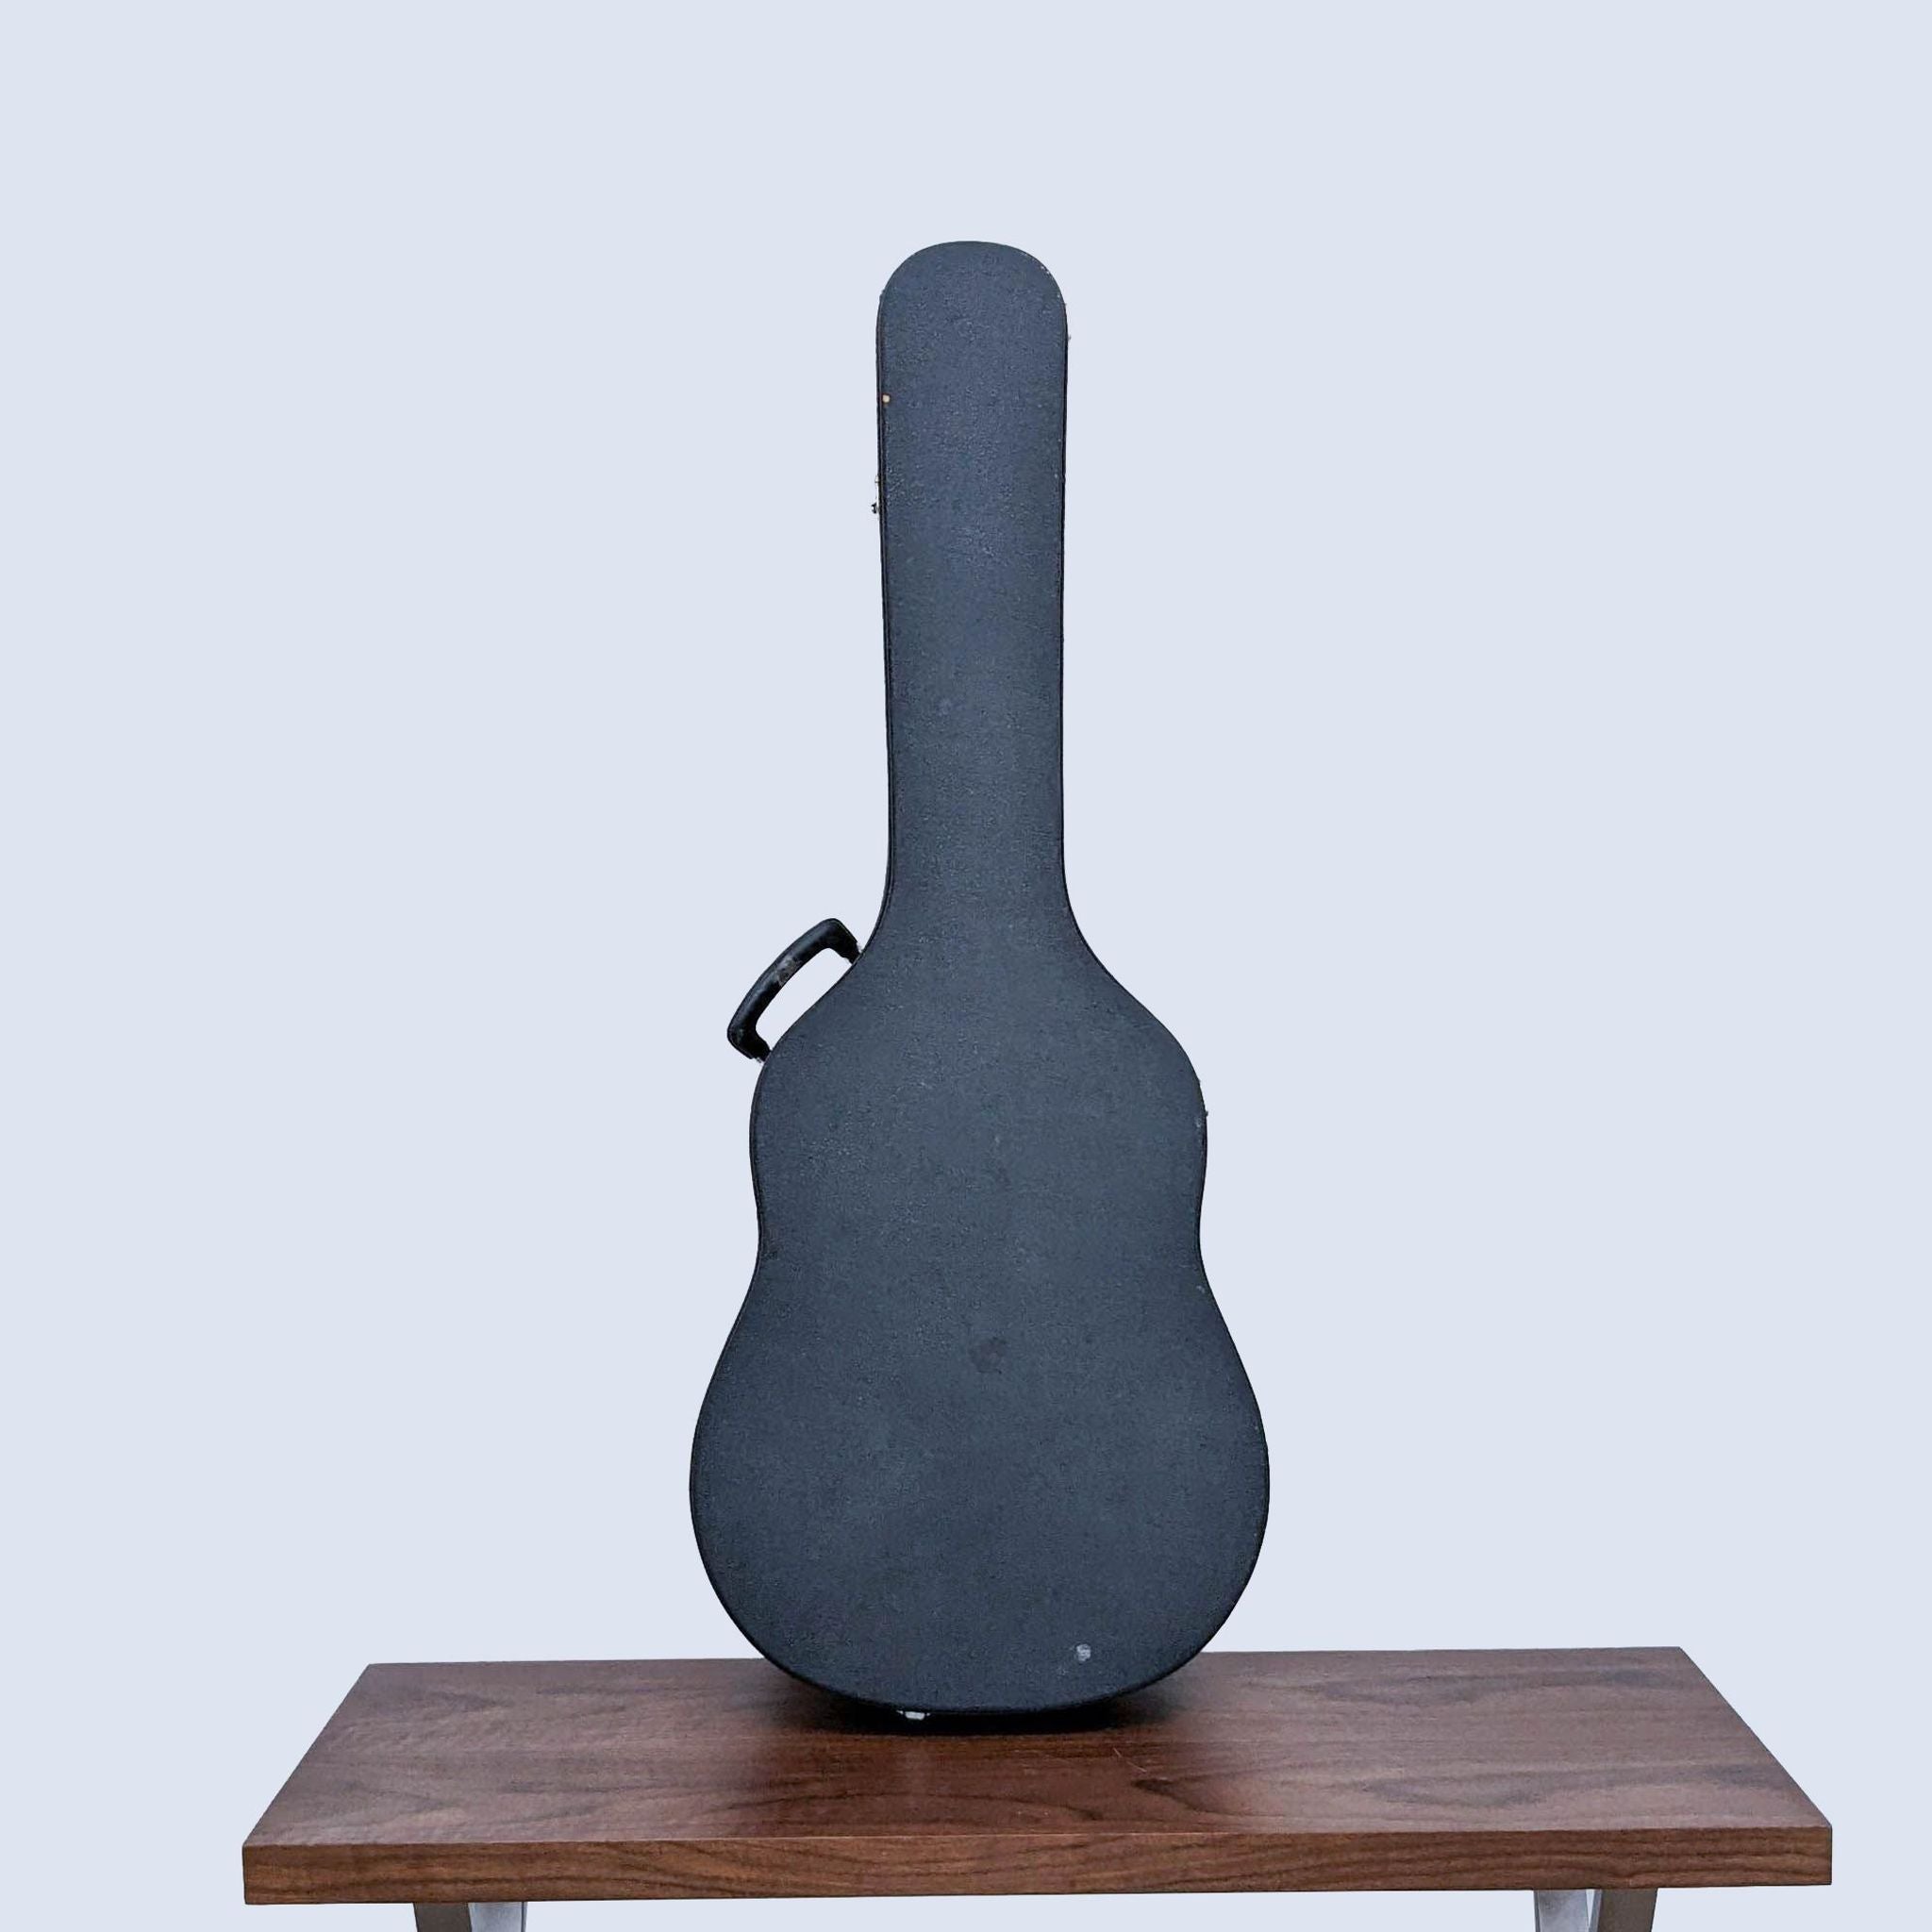 Morris MD-51M guitar inside a closed case on a wooden table against a grey background.